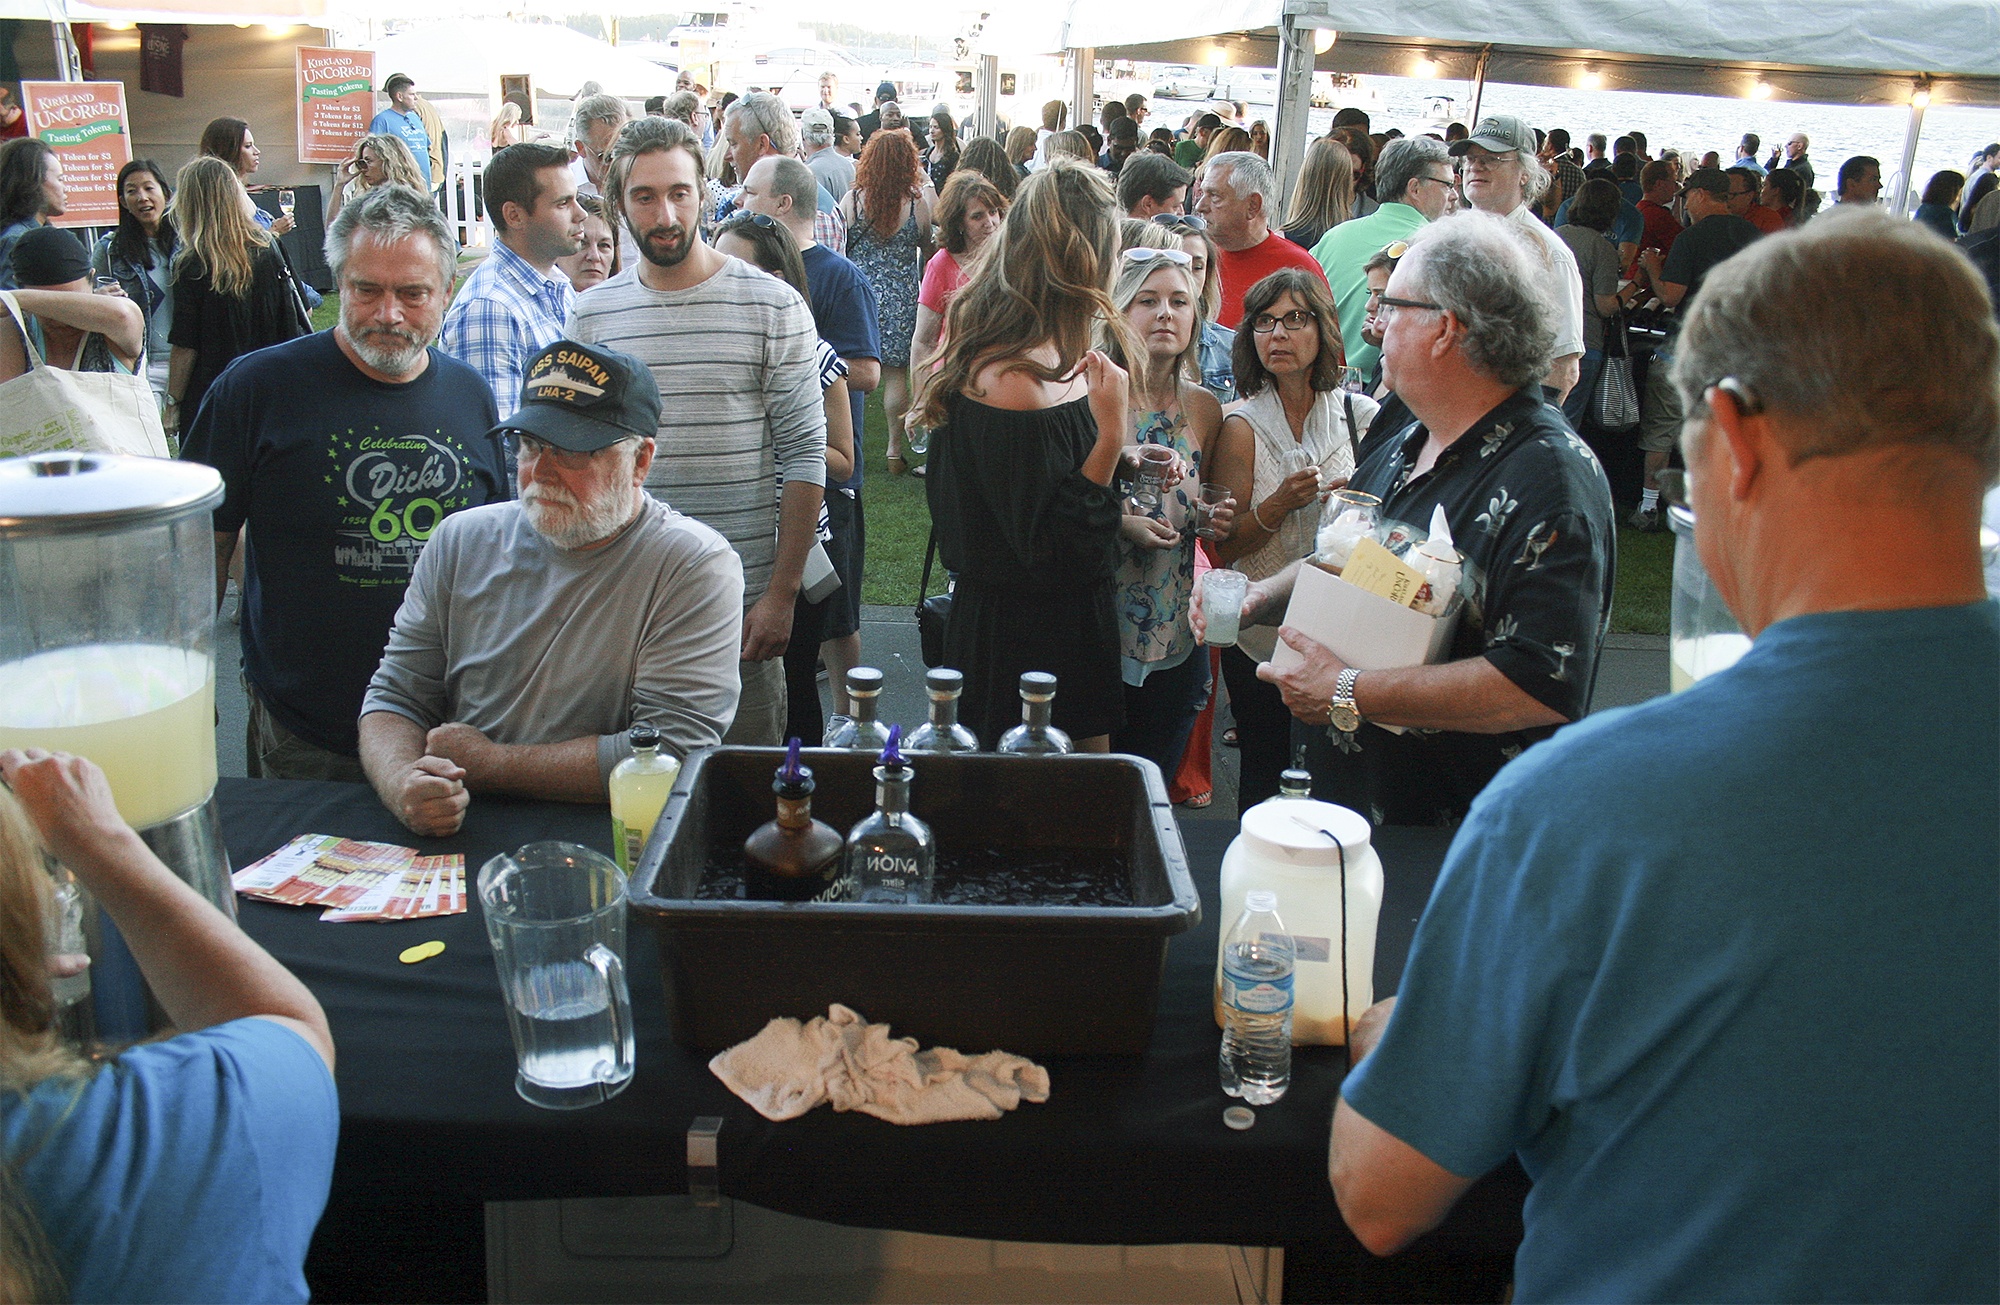 Festival-goers stand in line for margaritas on July 15 at Marina Park in Kirkland. The annual wine and beer festival packed the park on Friday